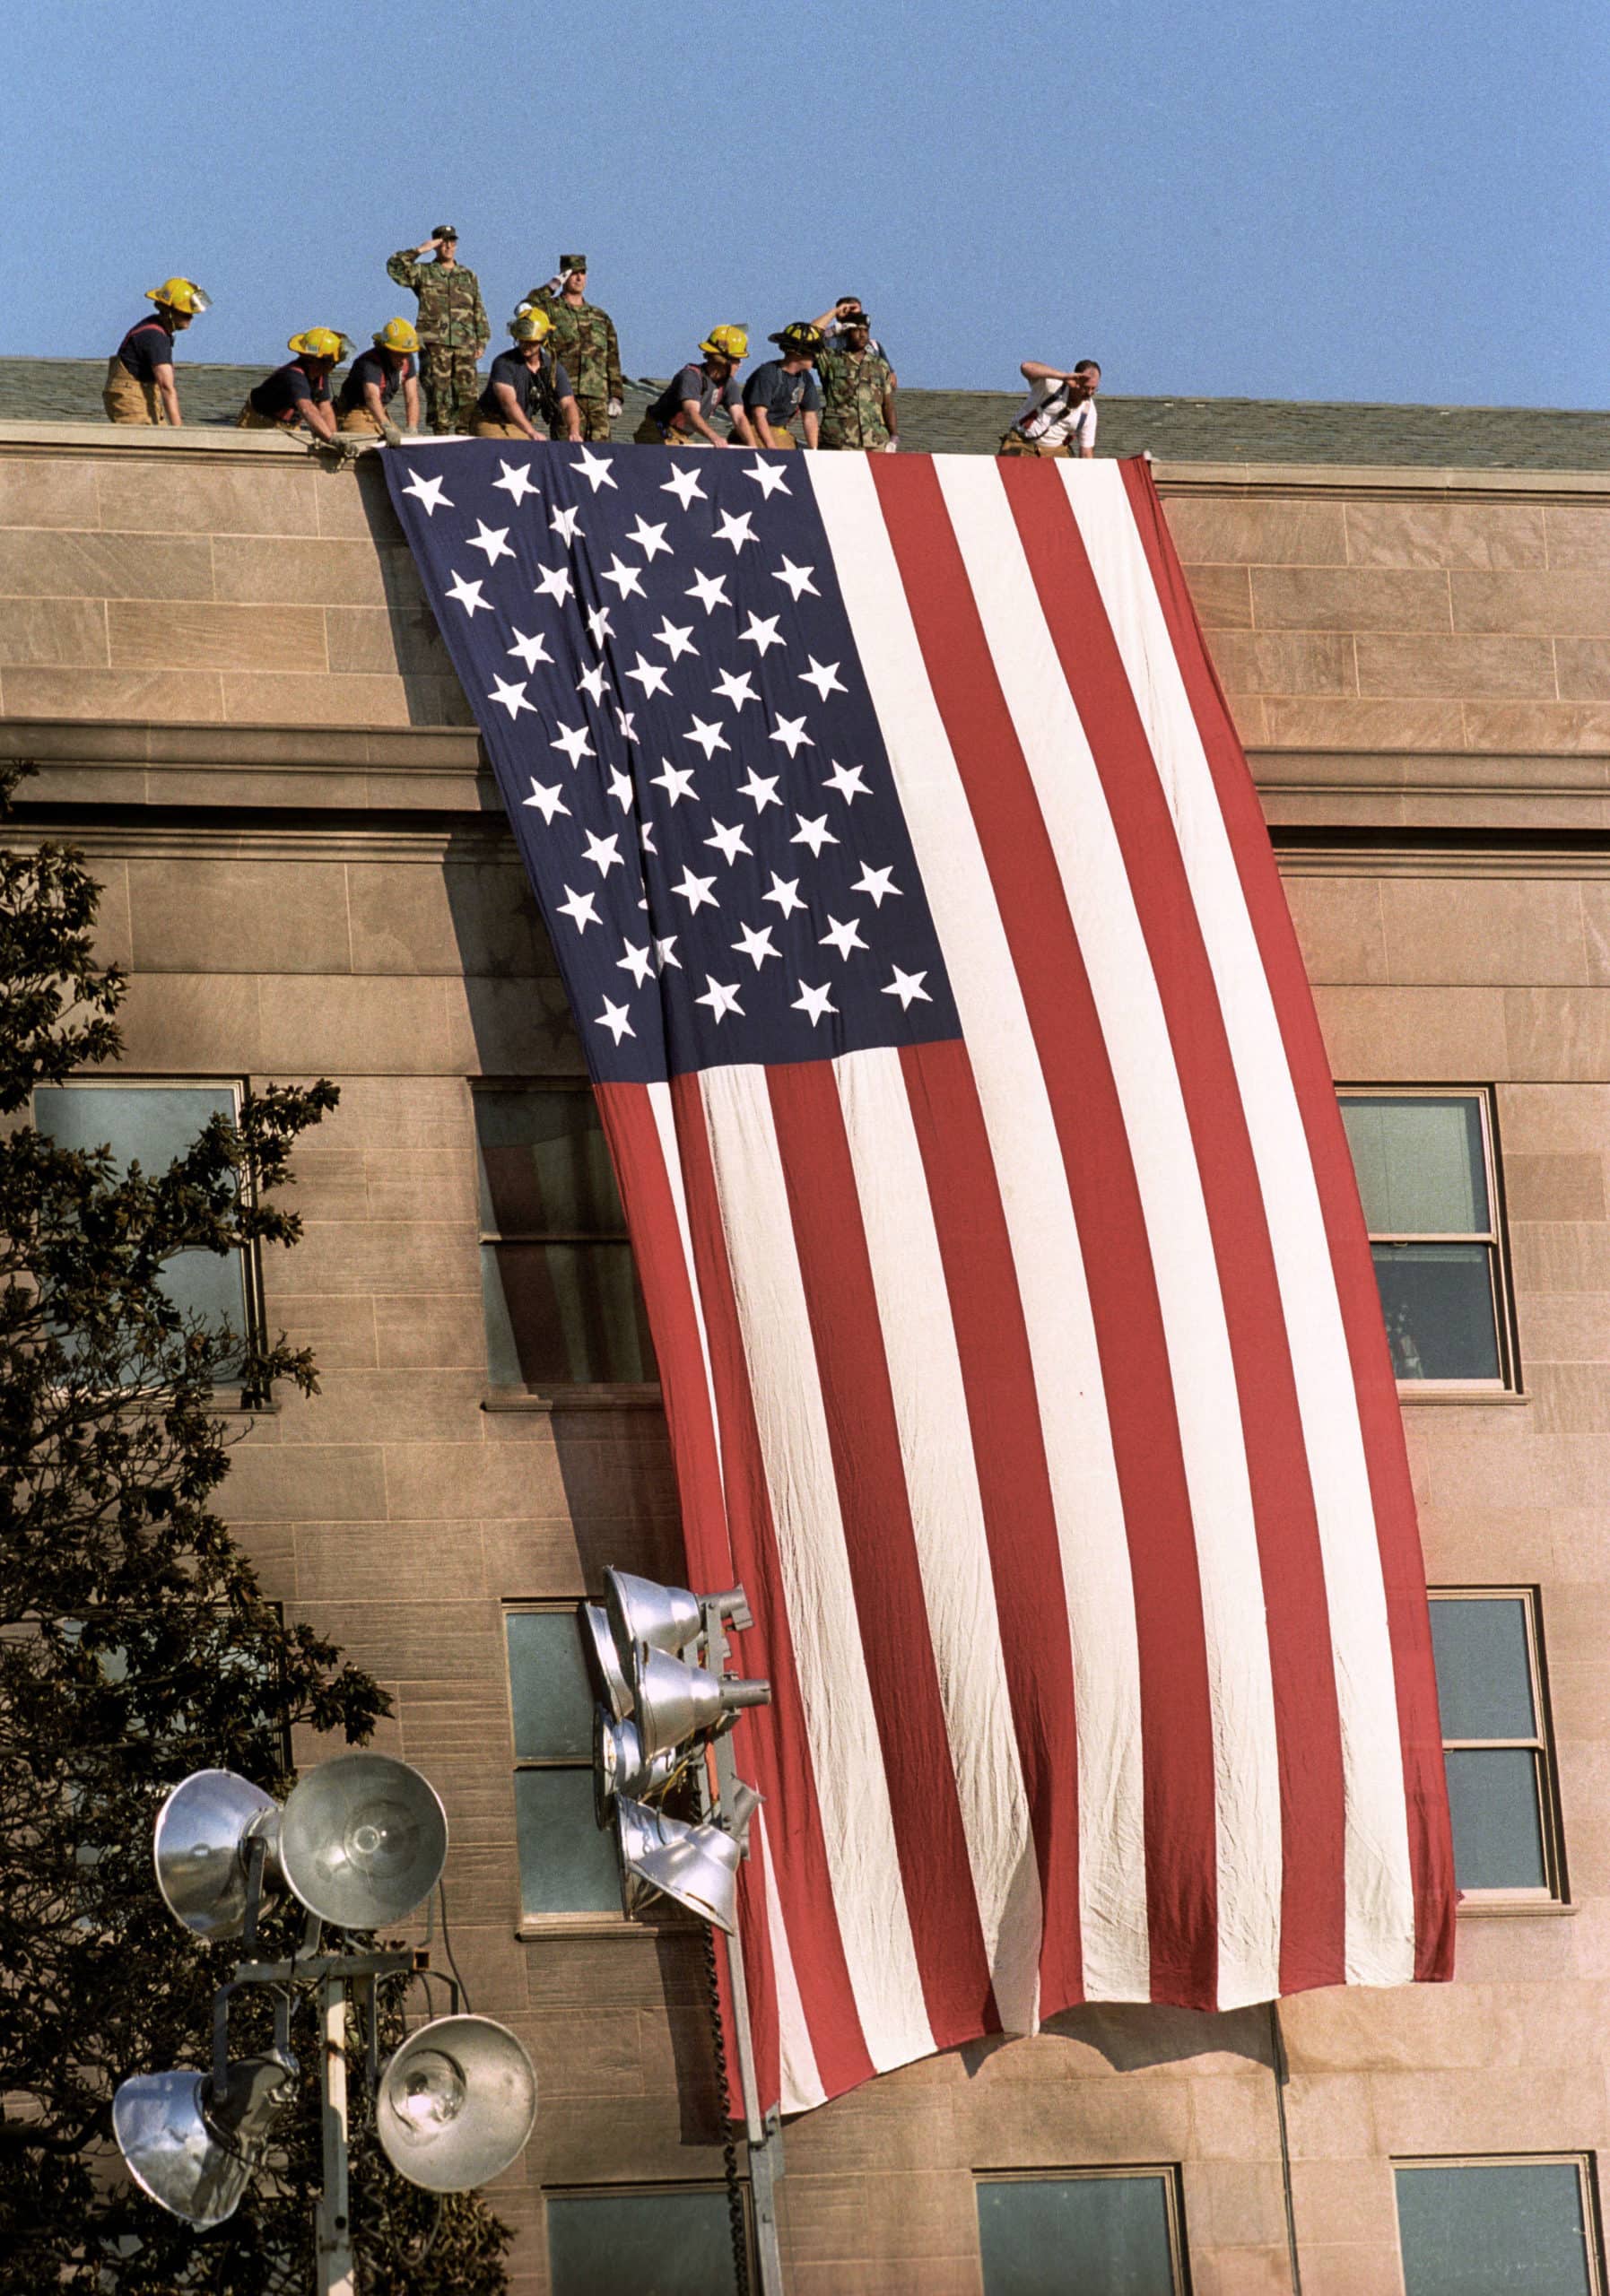 WASHINGTON - - Sept 12:The day after.  A giant American flag is unfurled by military personnel and firefighters next to where a plane crashed into the Pentagon, September 12, 2001. (David Hume Kennerly/Center for Creative Photography/University of Arizona).